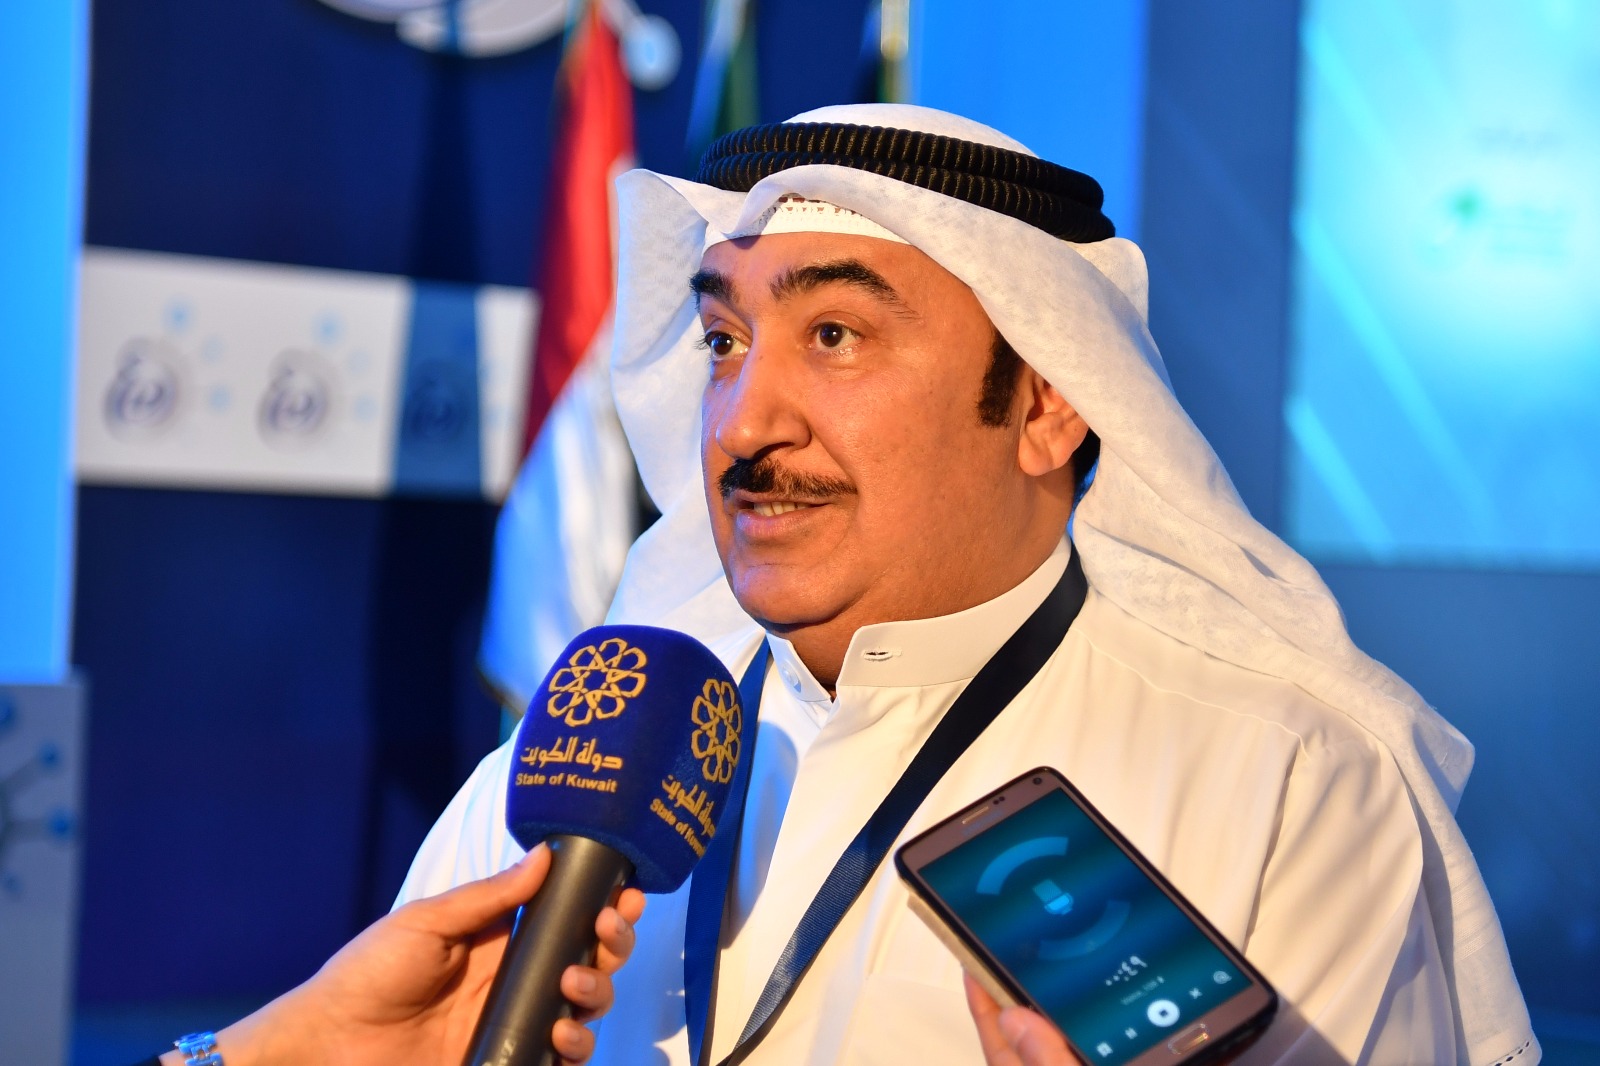 KUNA's Deputy Director-General for the Editorial Sector and Editor-in-Chief Saad Al-Ali